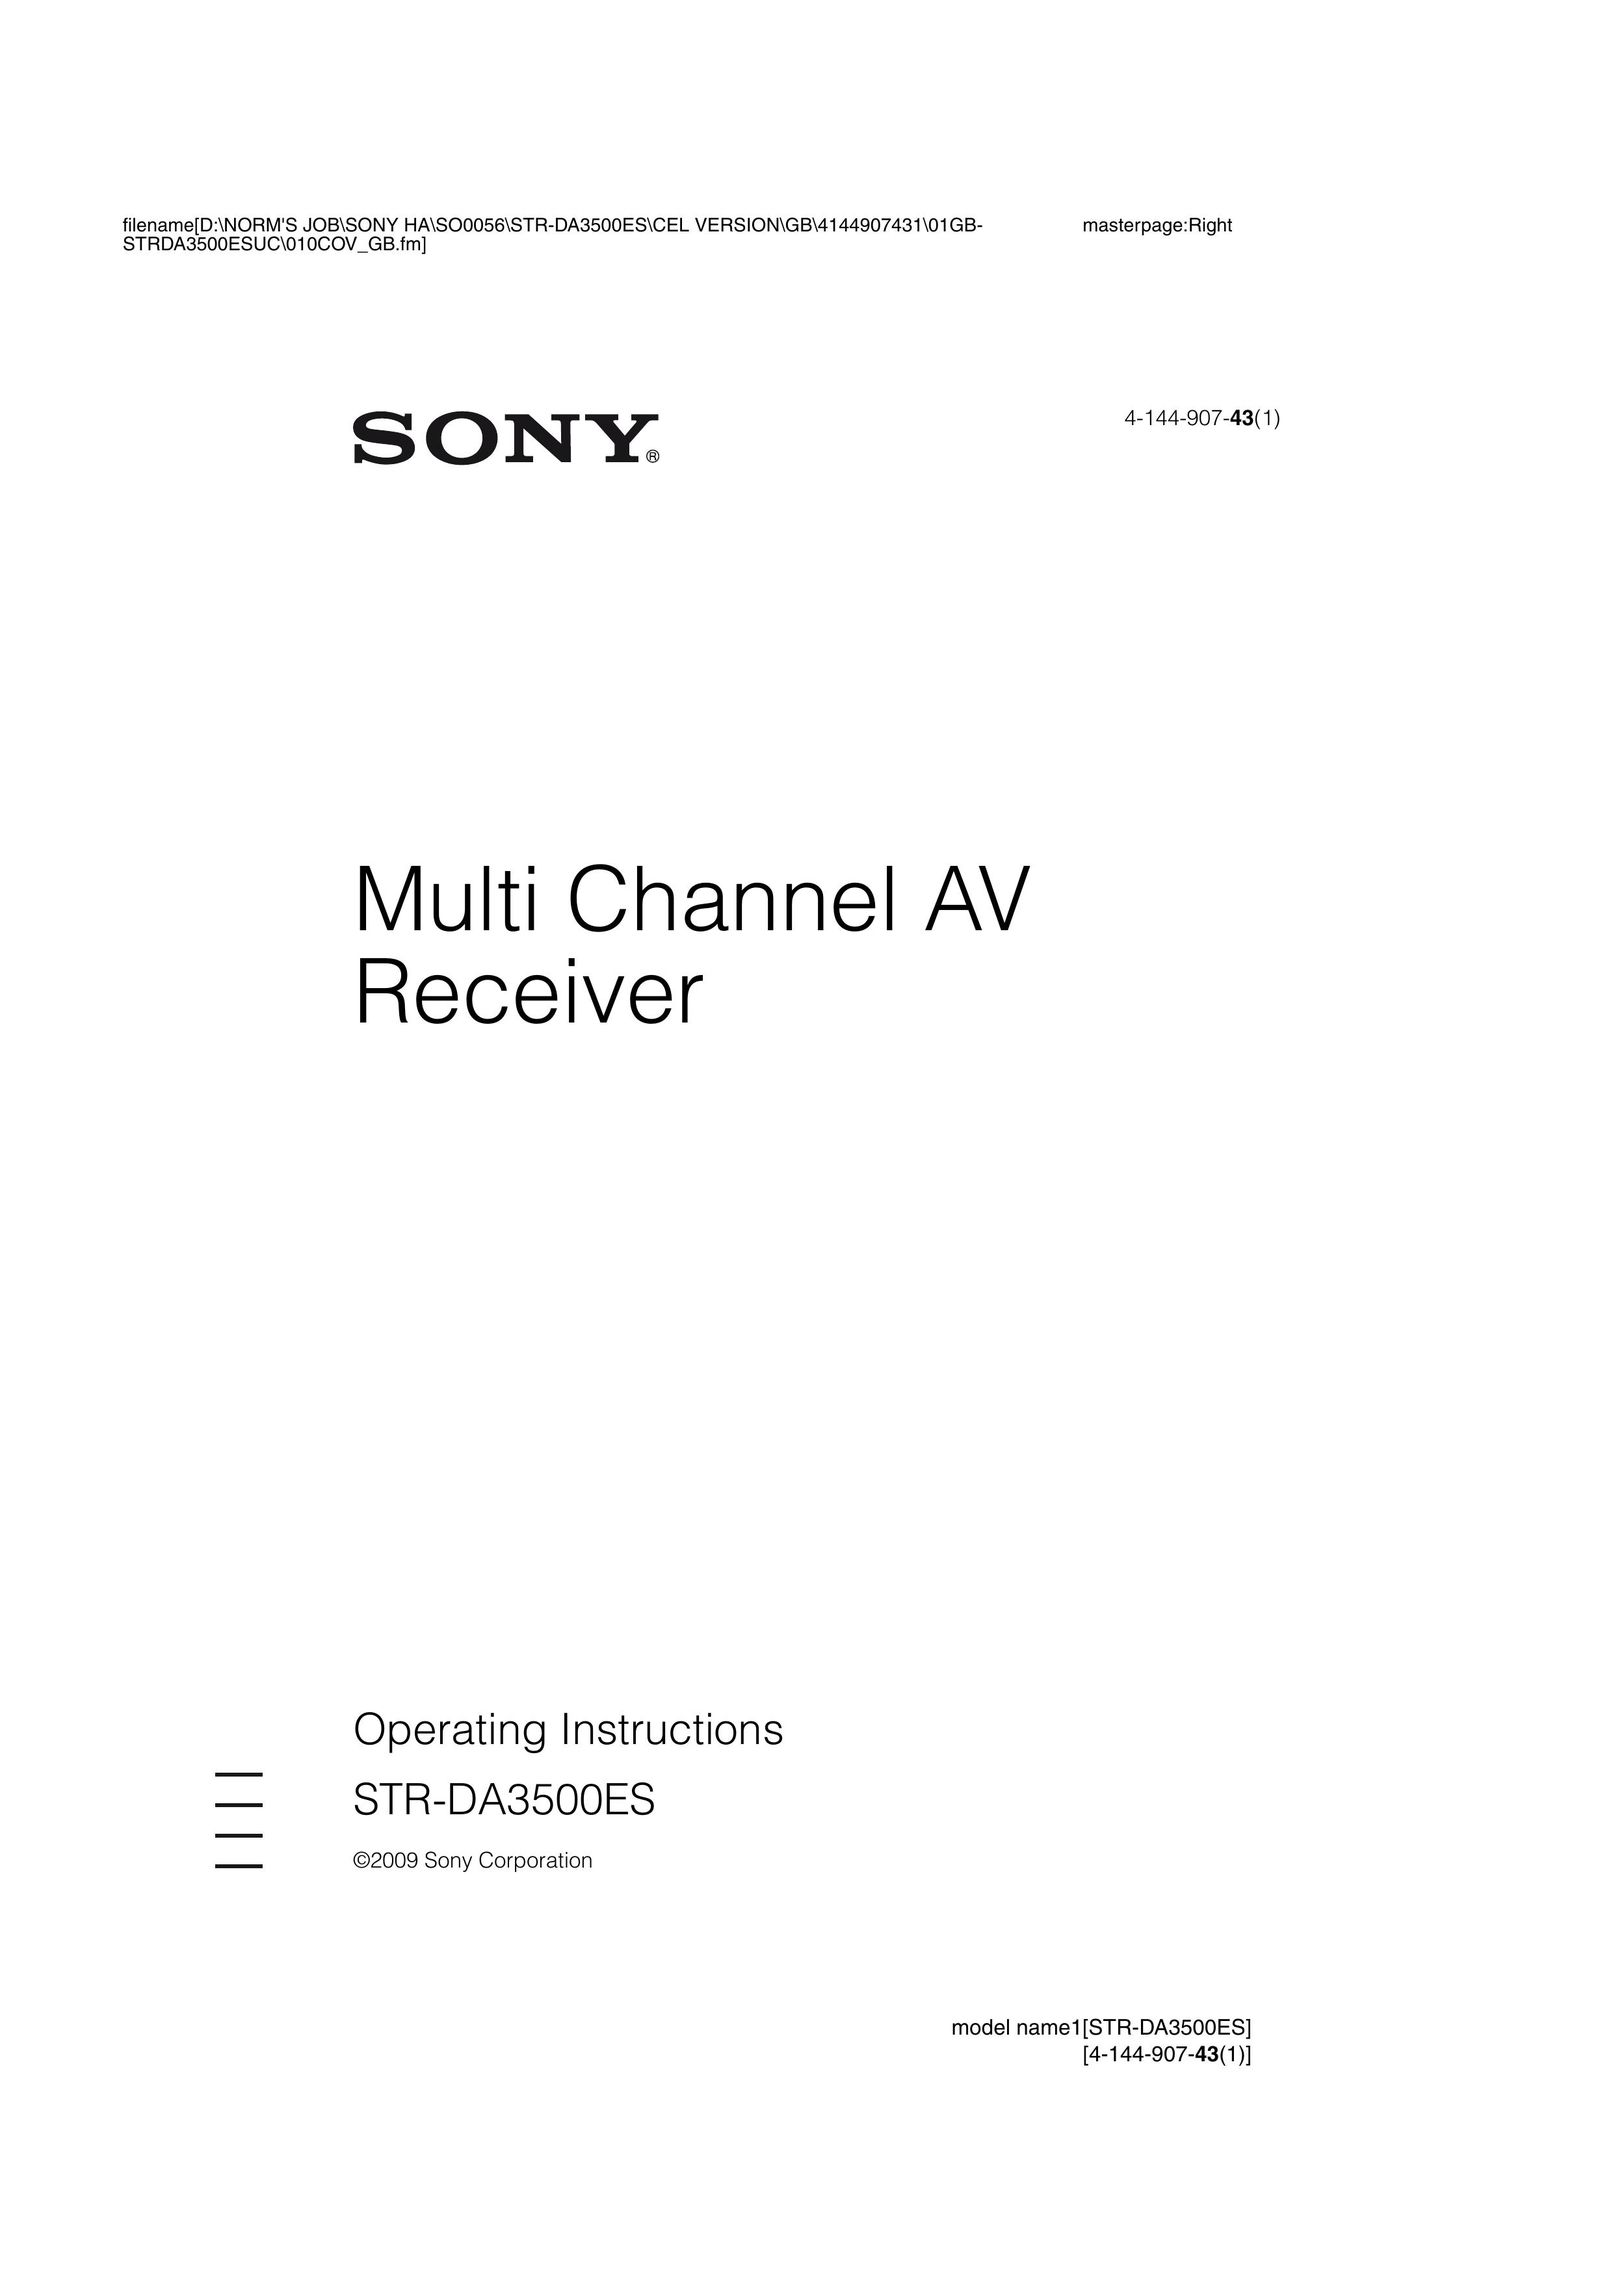 Sony 4-144-907-43(1) Stereo Receiver User Manual